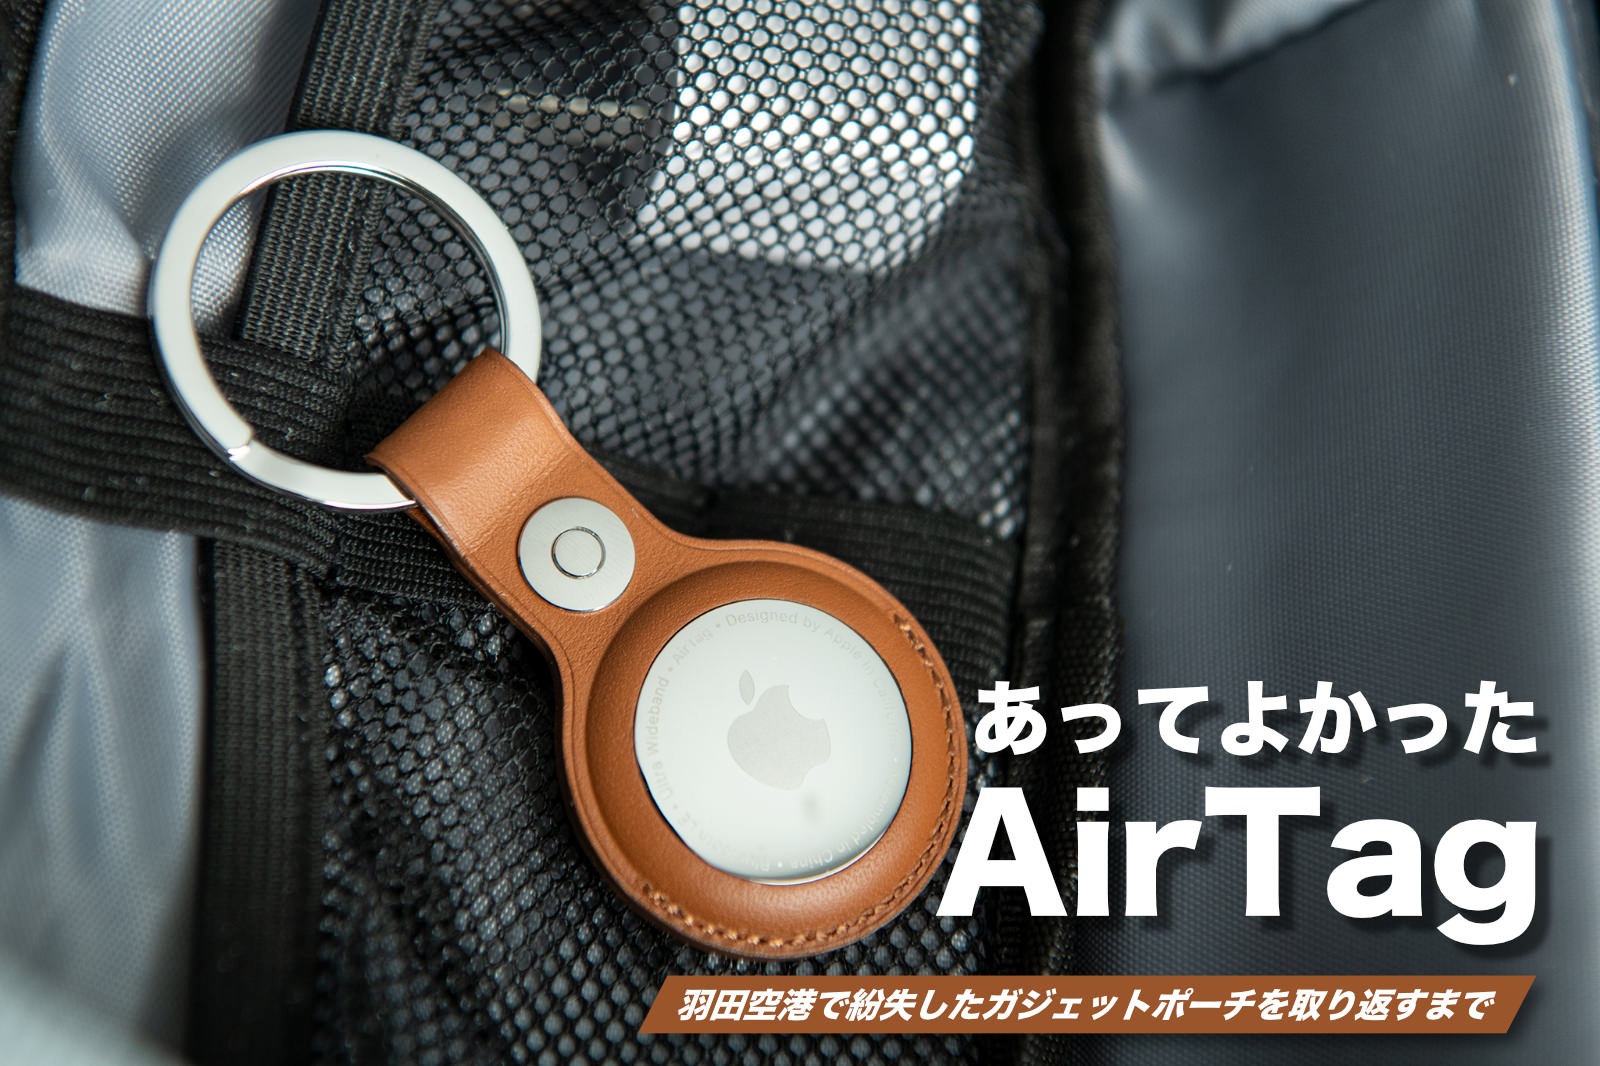 Finding my Gadget Pouch with AirTag